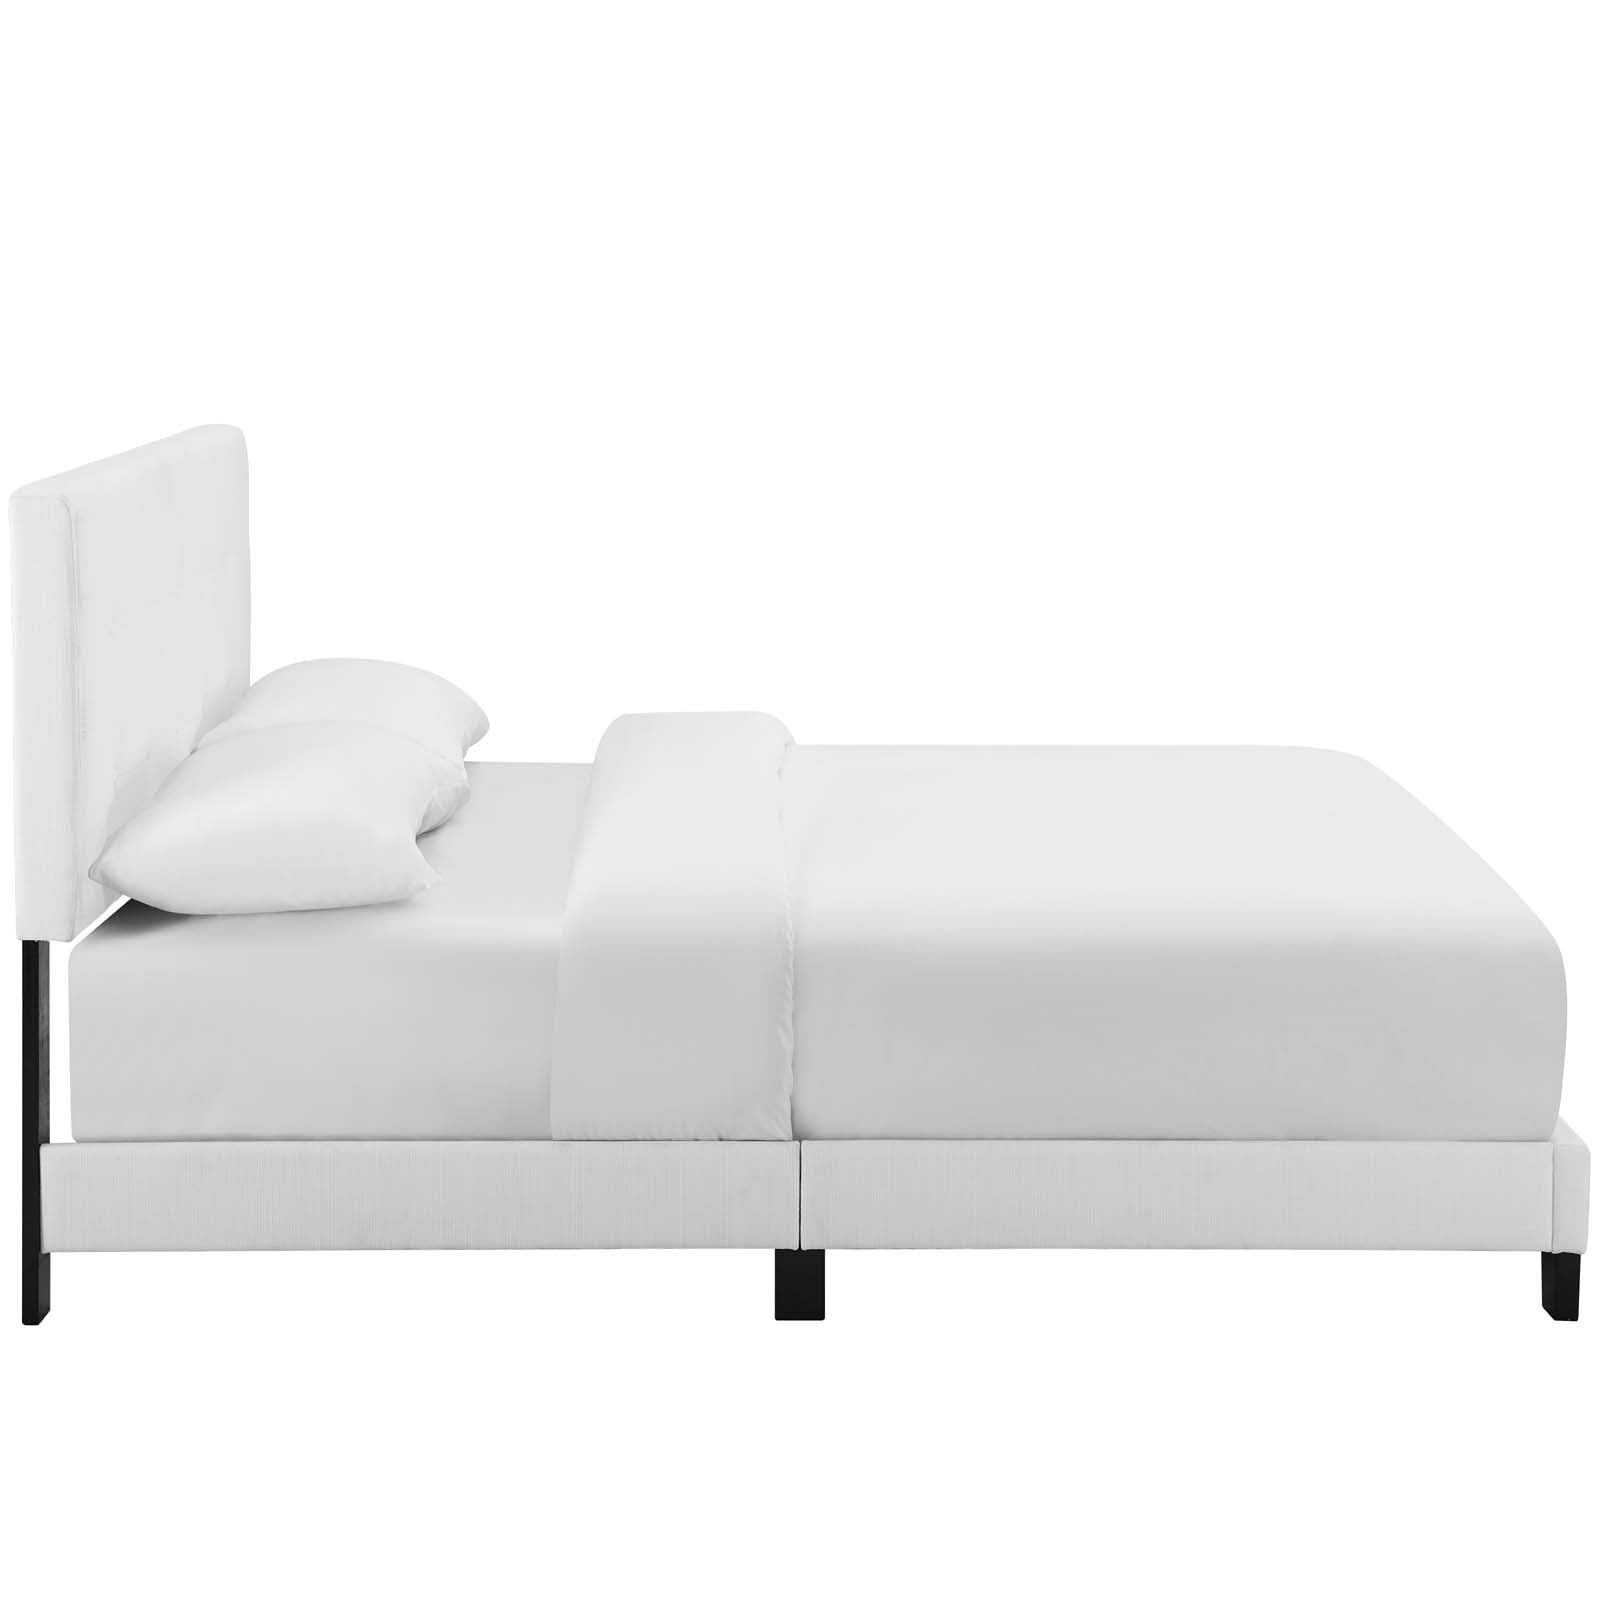 Modway Beds - Melanie King Tufted Button Upholstered Fabric Platform Bed White